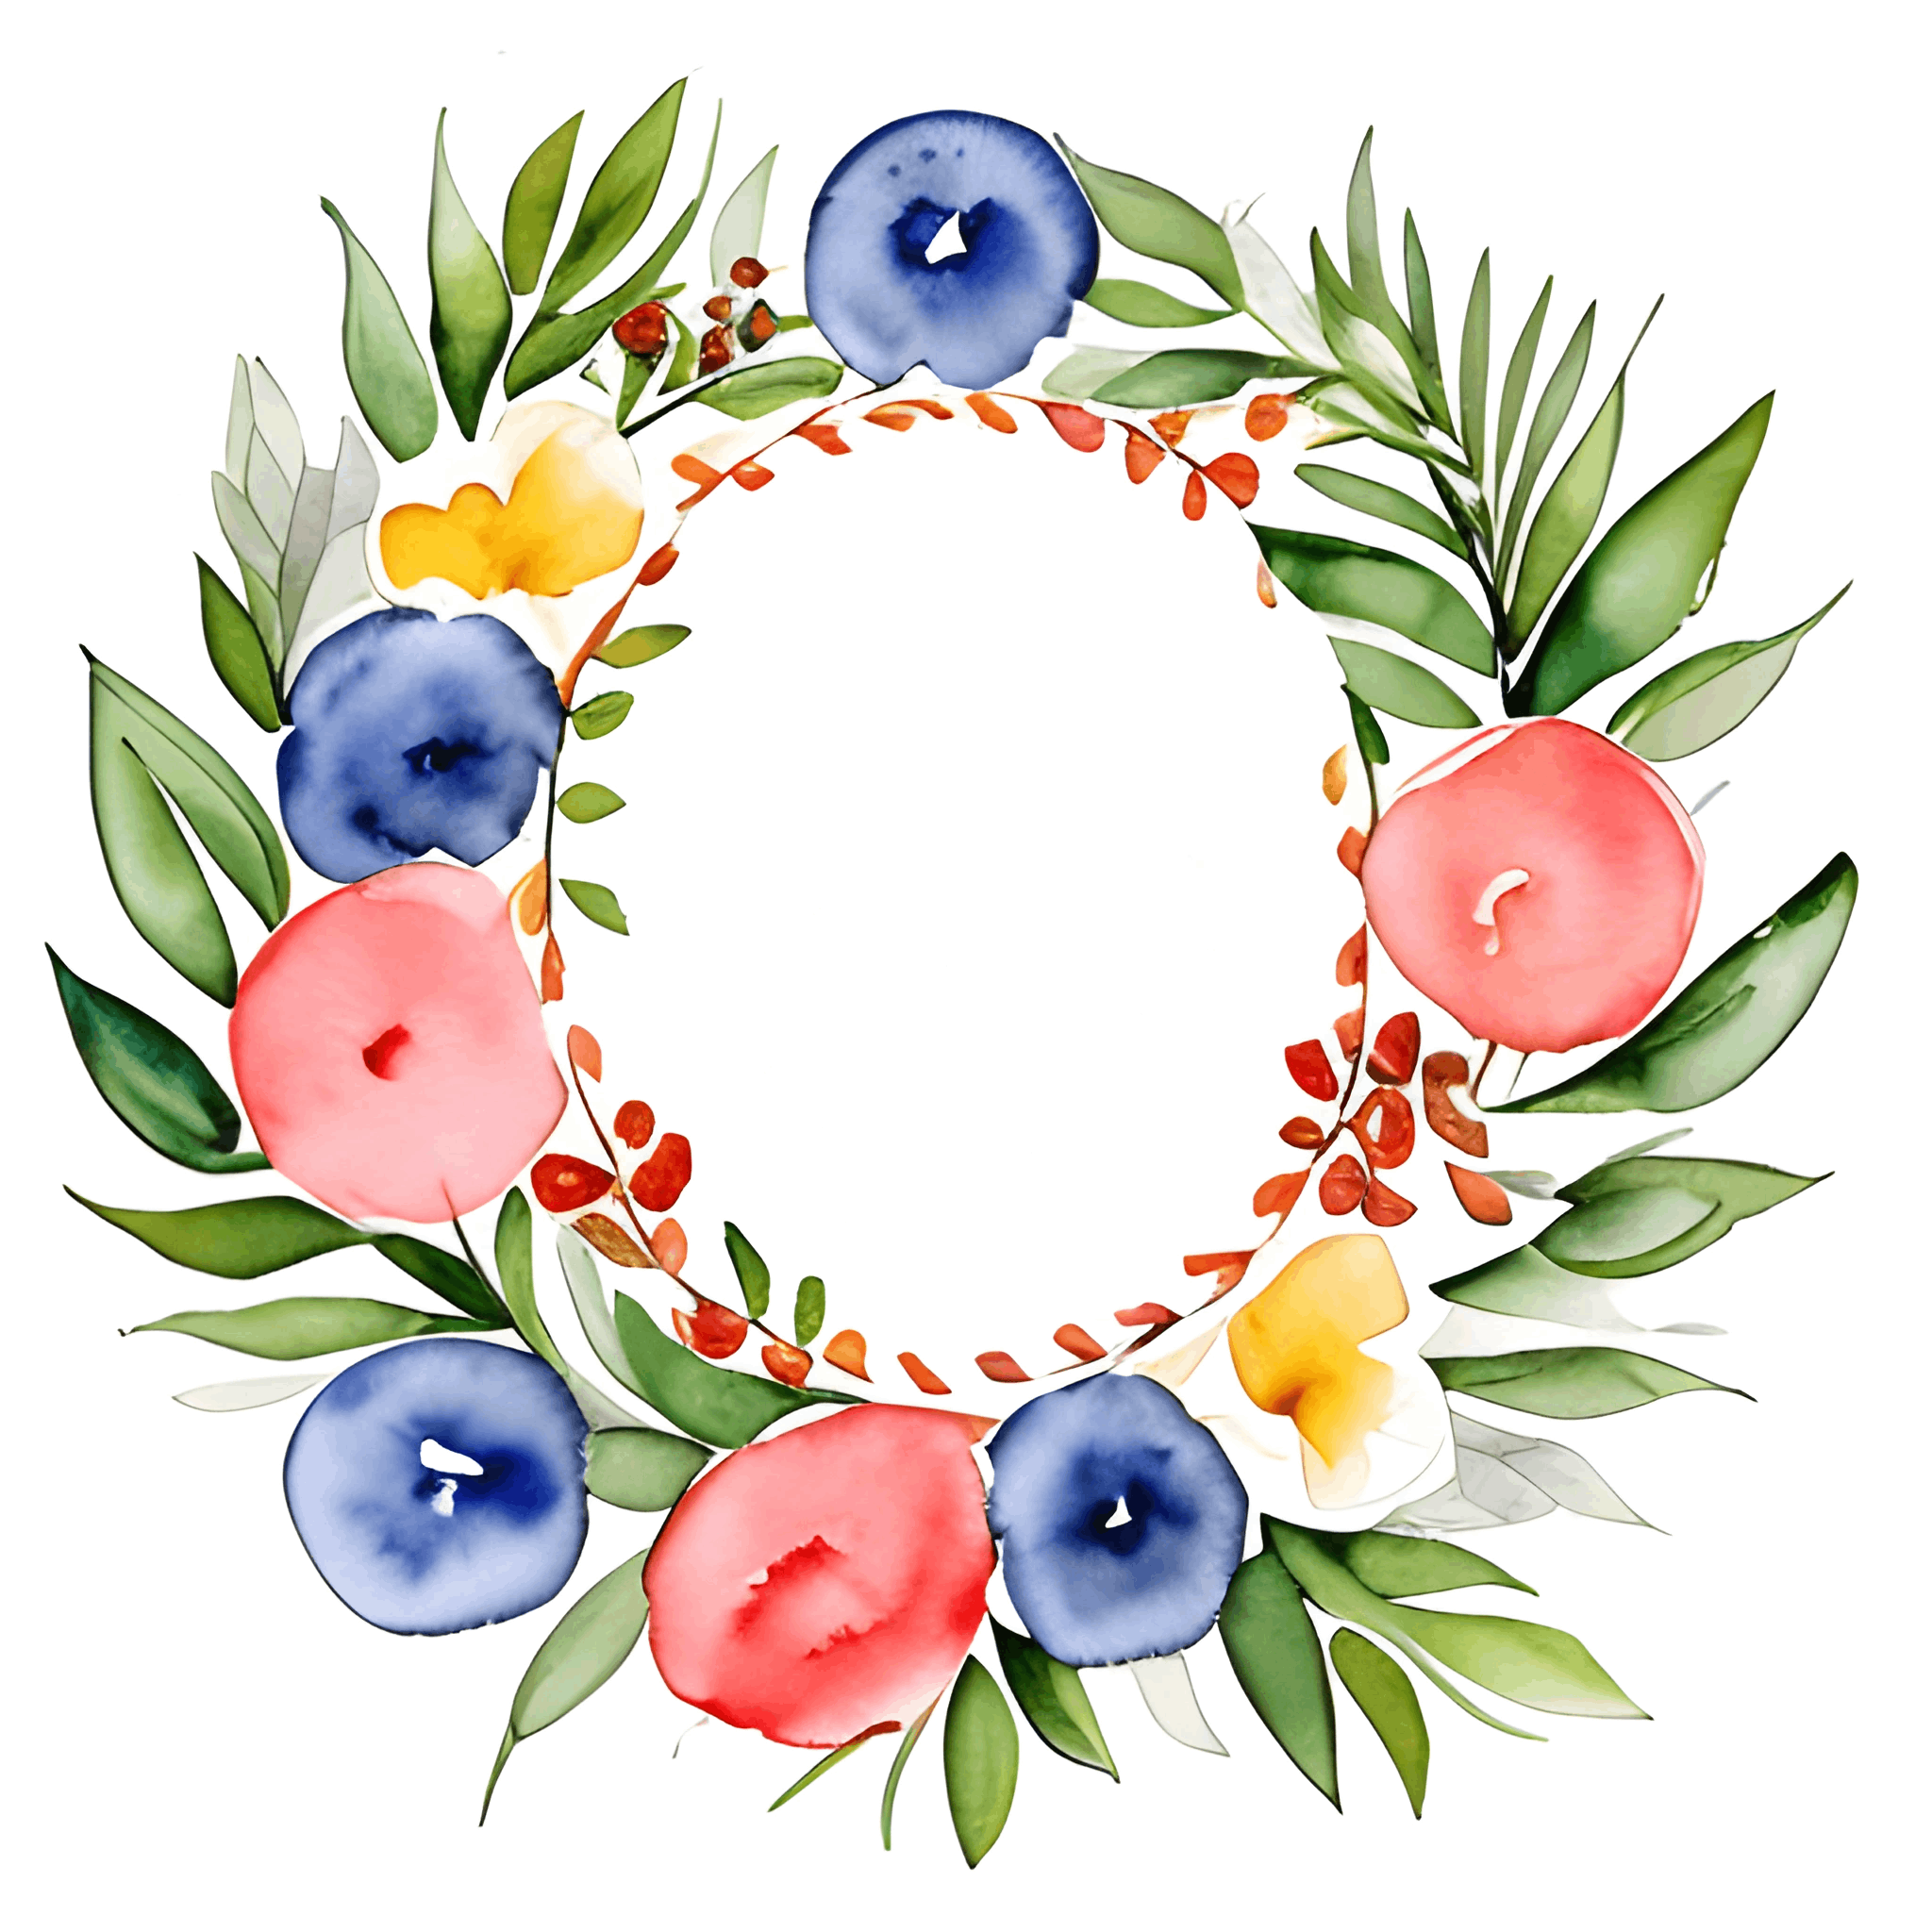 a wreath of flowers and leaves on a white background